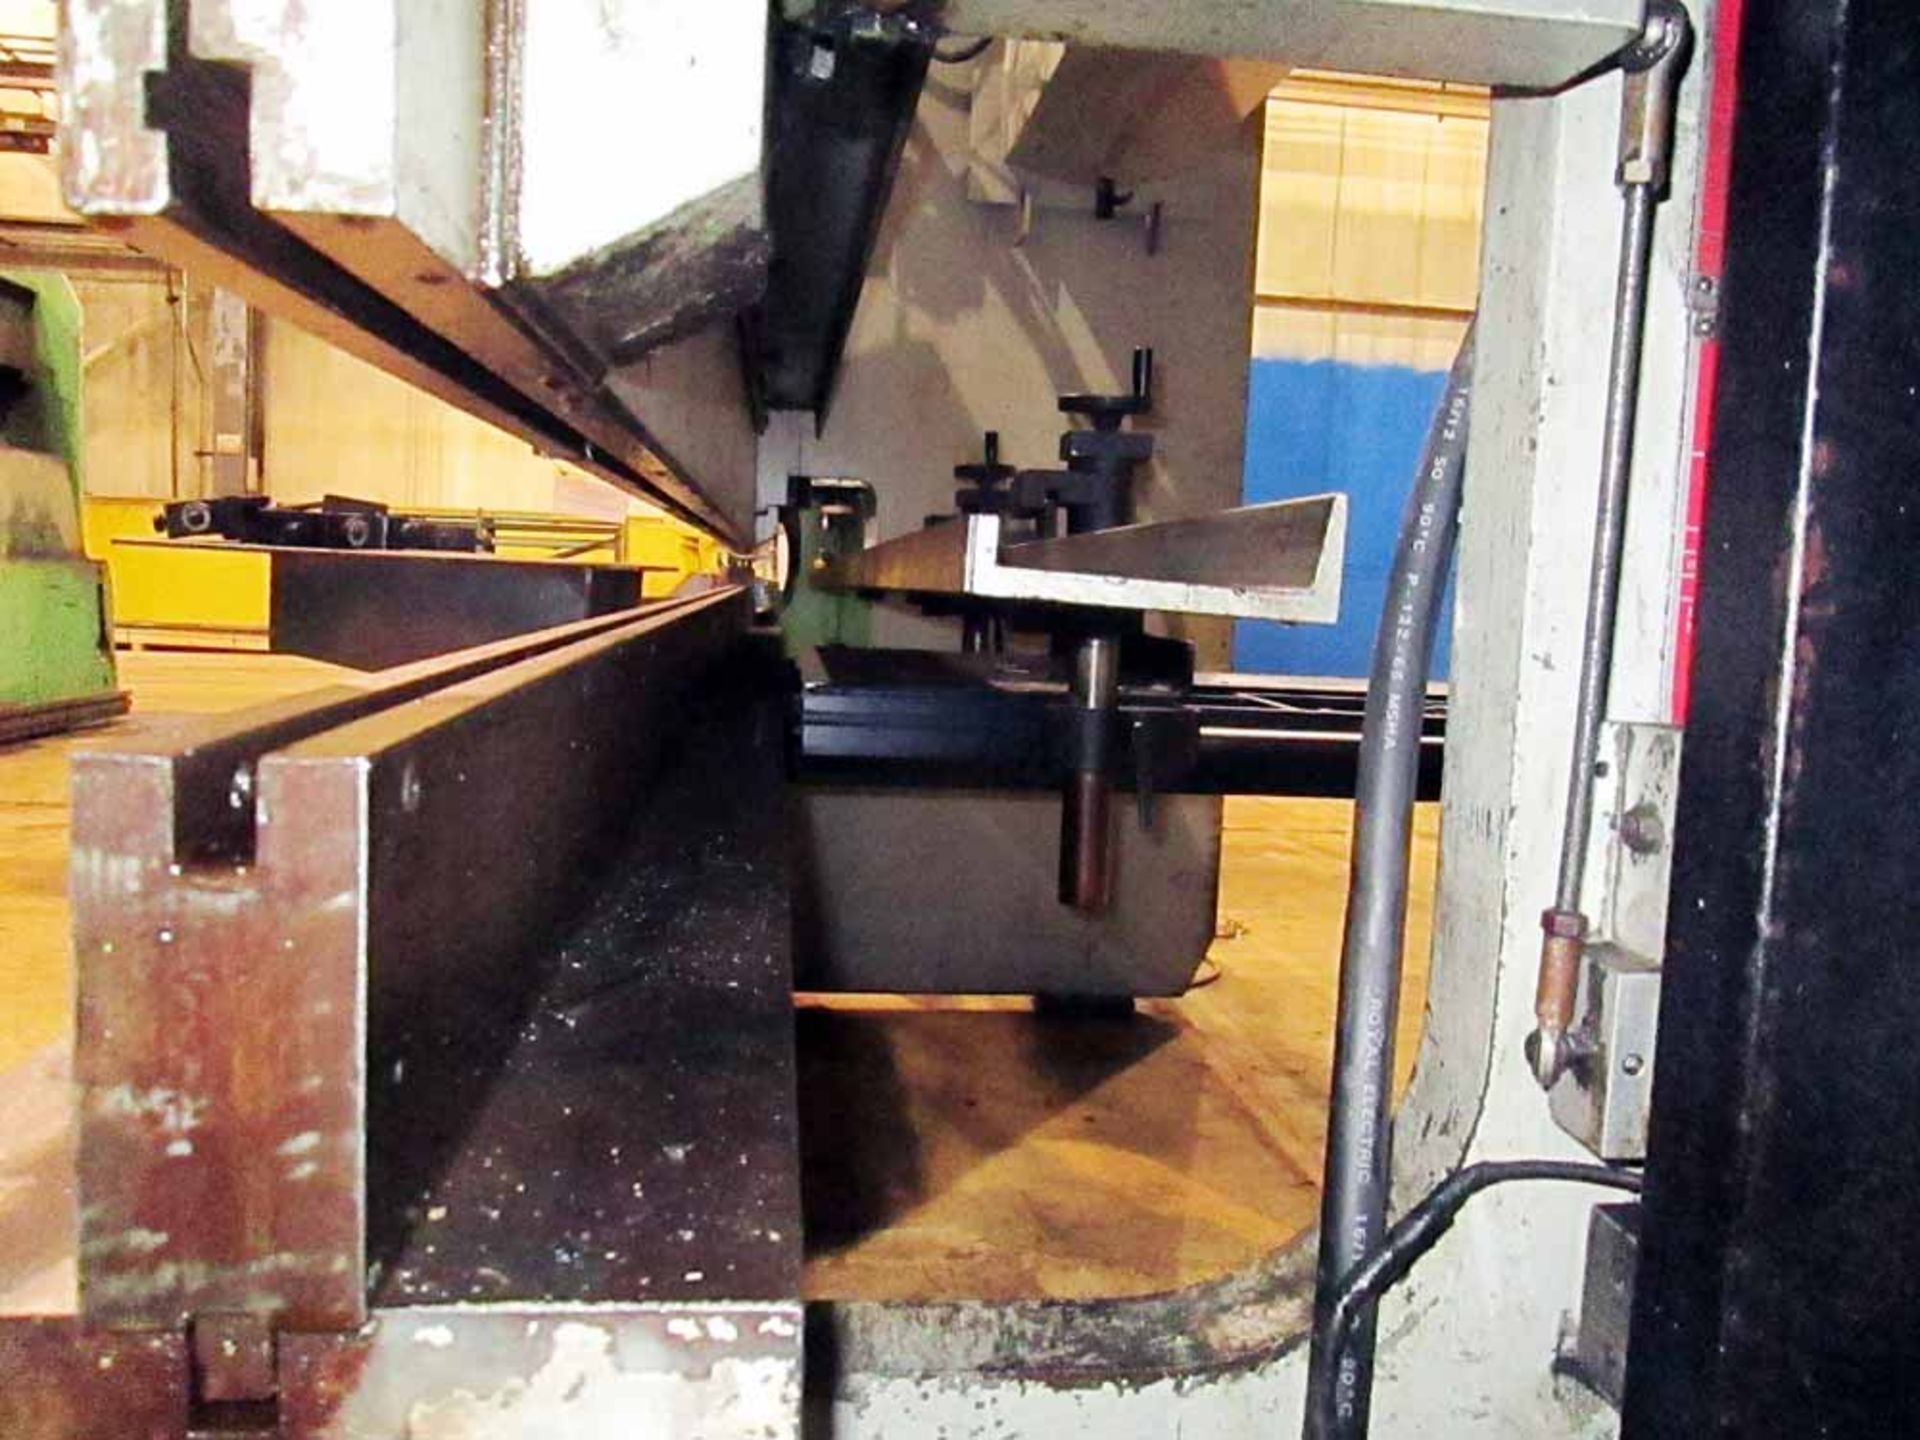 1986 Pacific CNC 2 Axis Hydraulic Press Brake, 110 Ton x 12', Mdl: J110-12, S/N: 9999 - Painesville, - Image 11 of 12